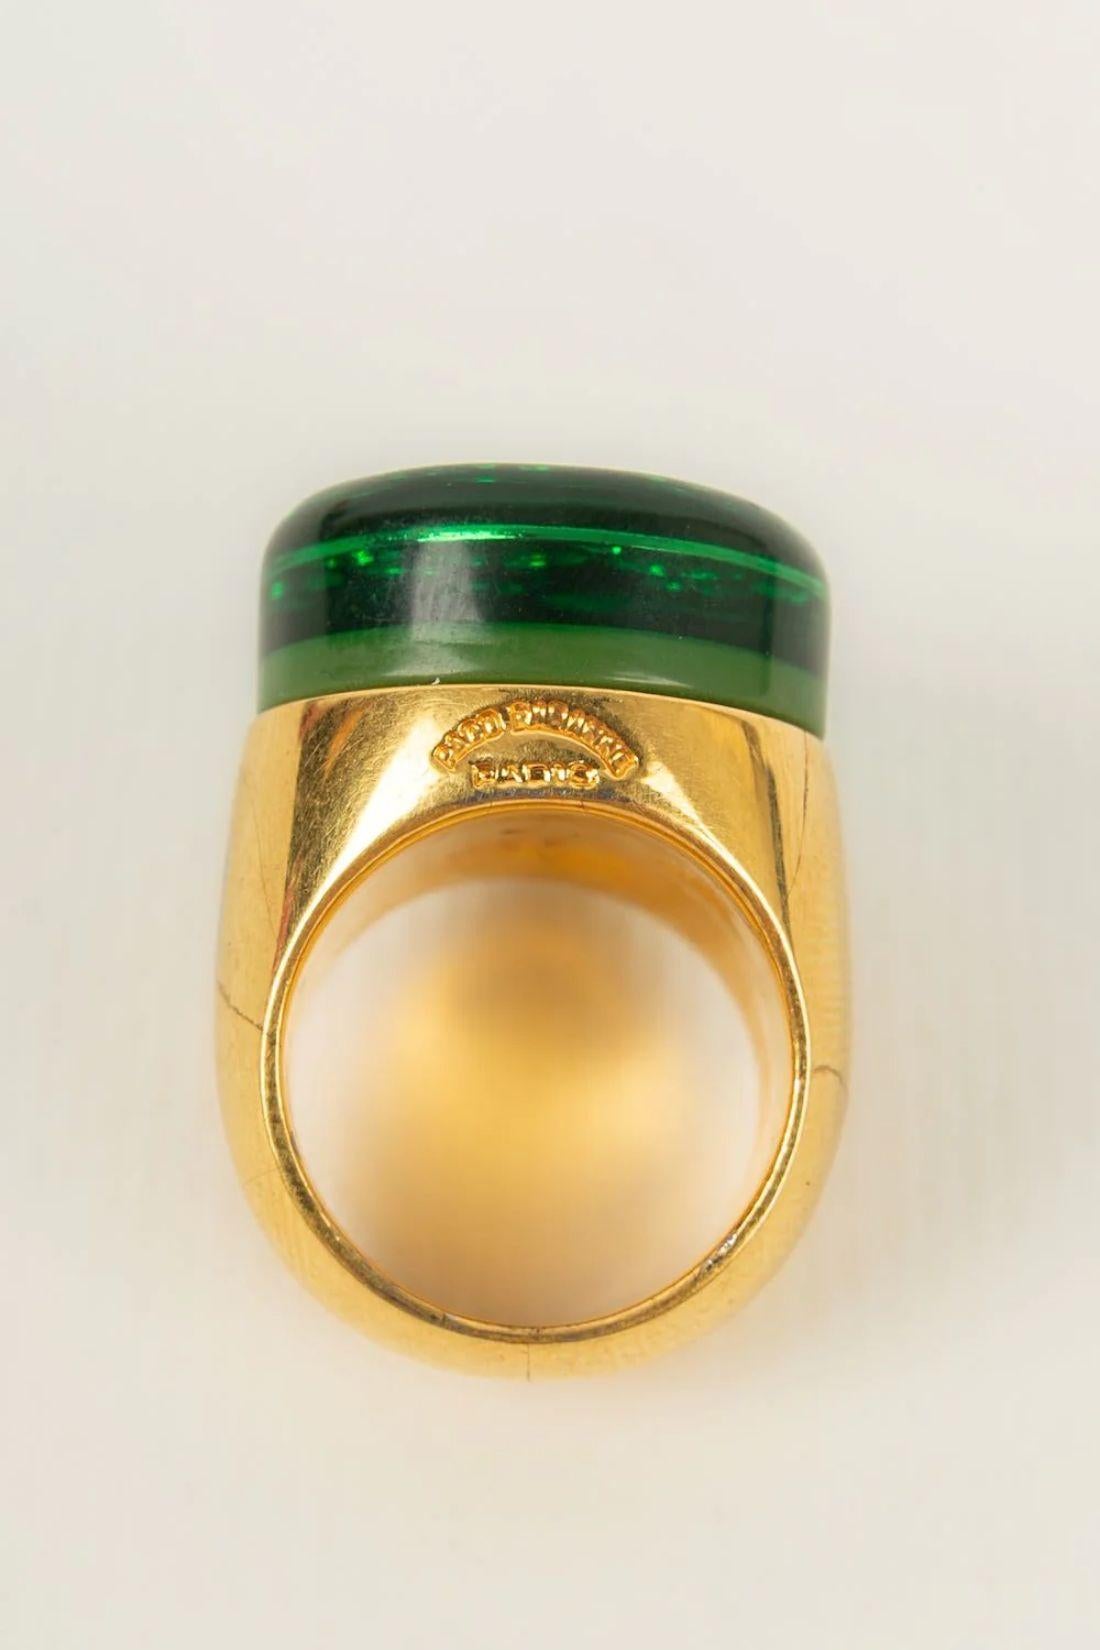 Paco Rabanne Ring in Gold Metal and Green Resin For Sale 2